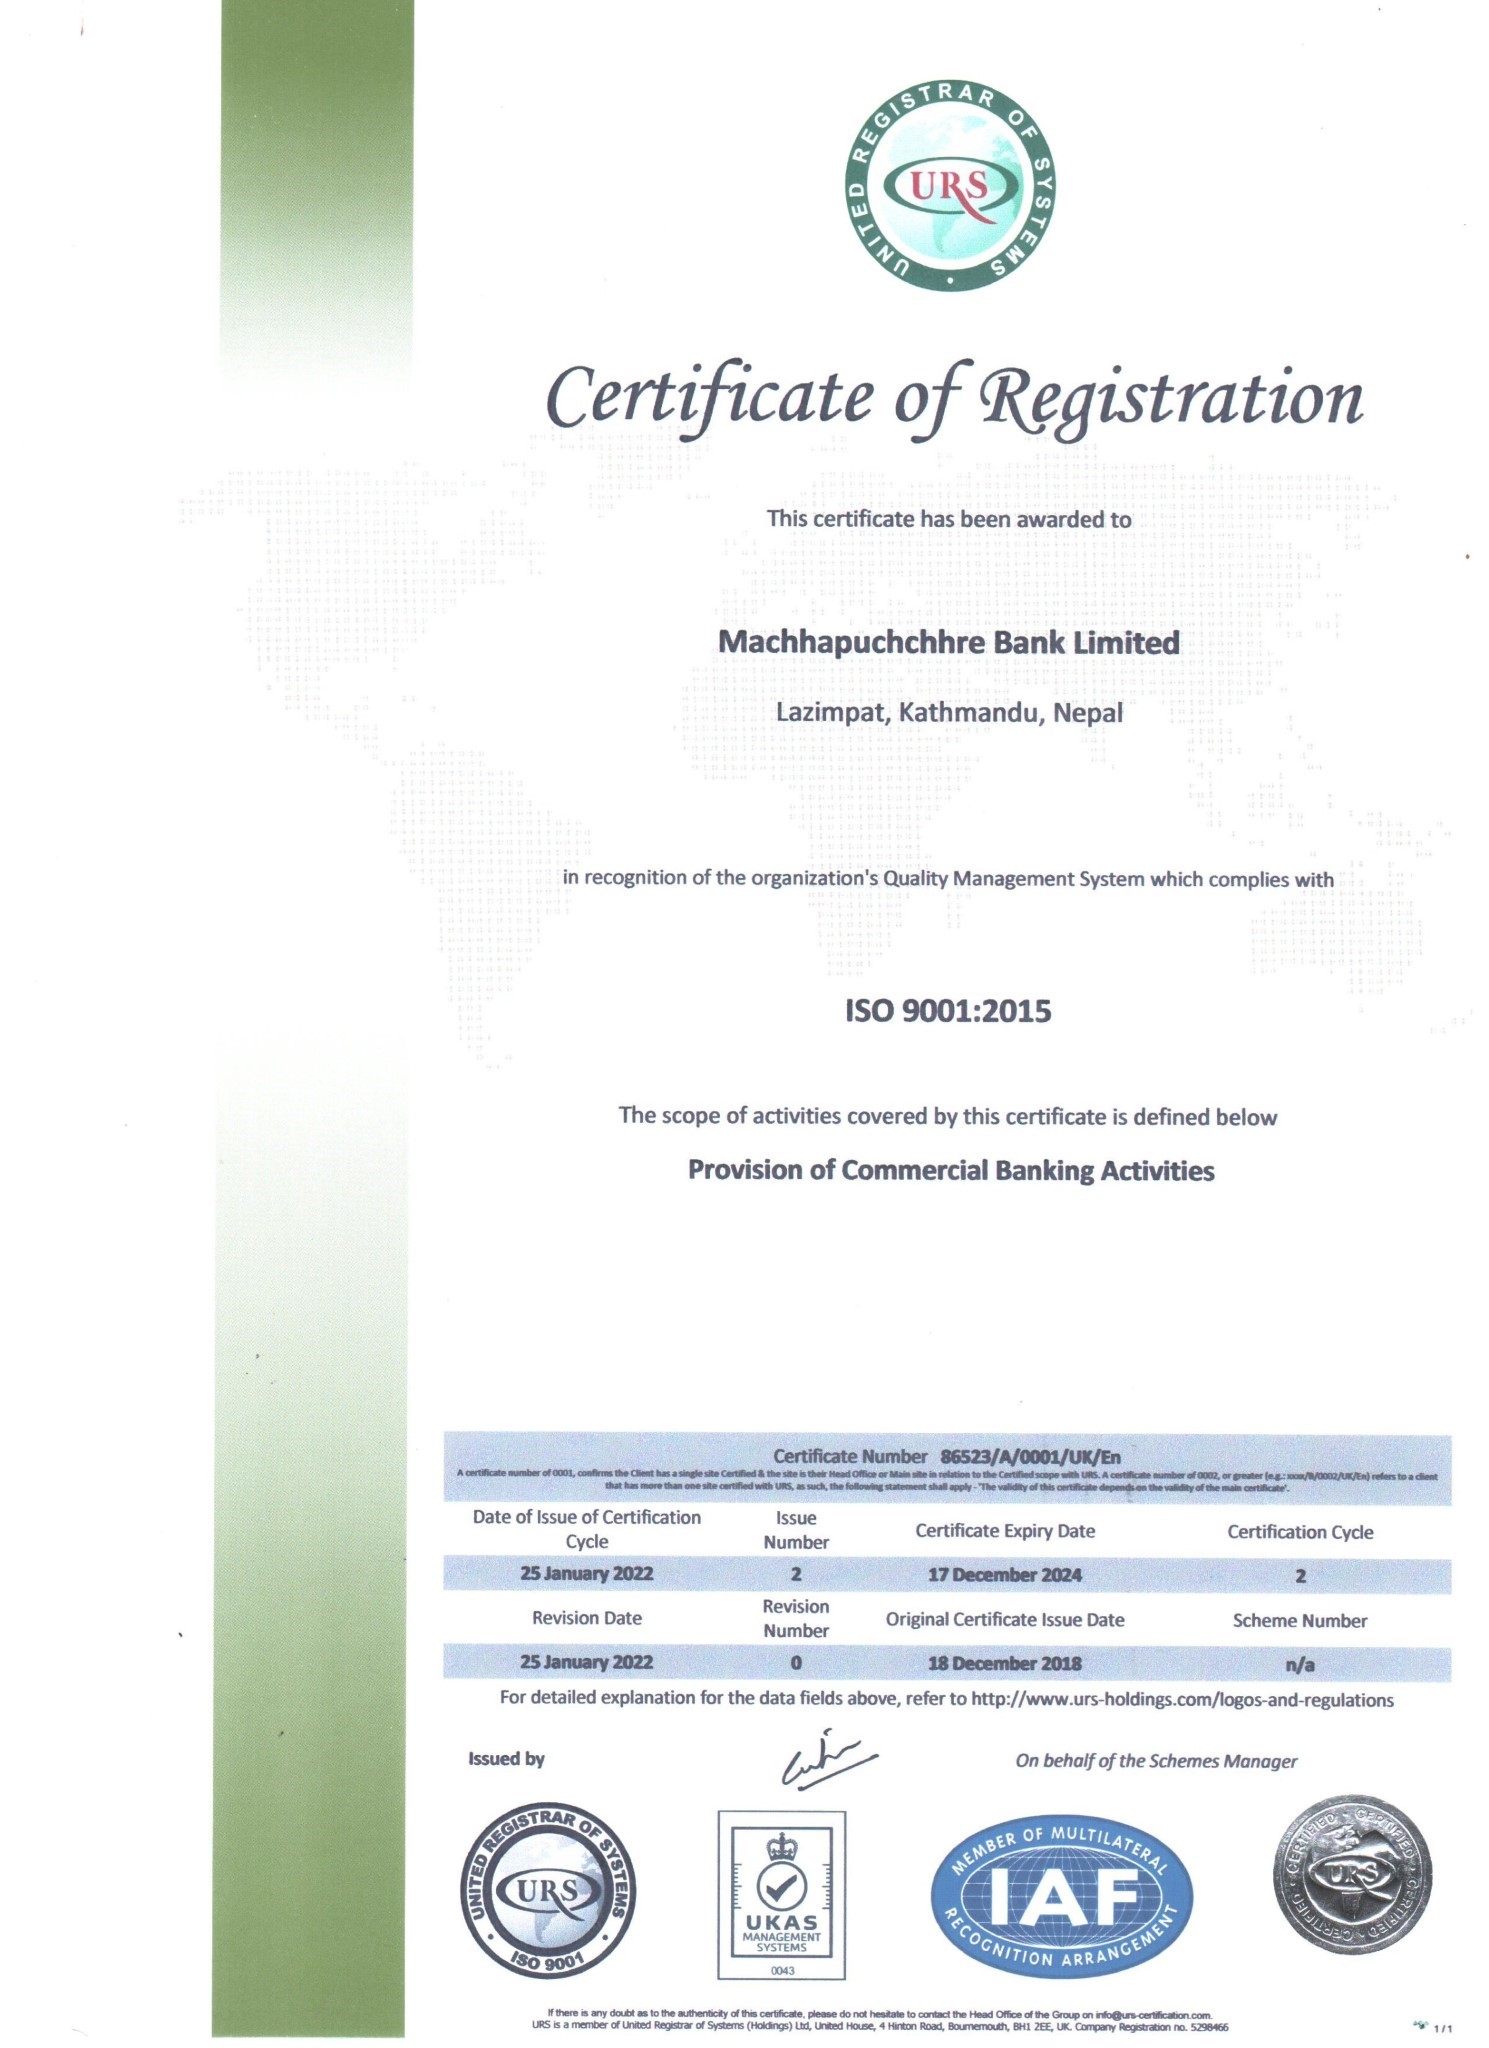 Machhapuchchhre Bank receives coveted ISO 9001:2015 certification